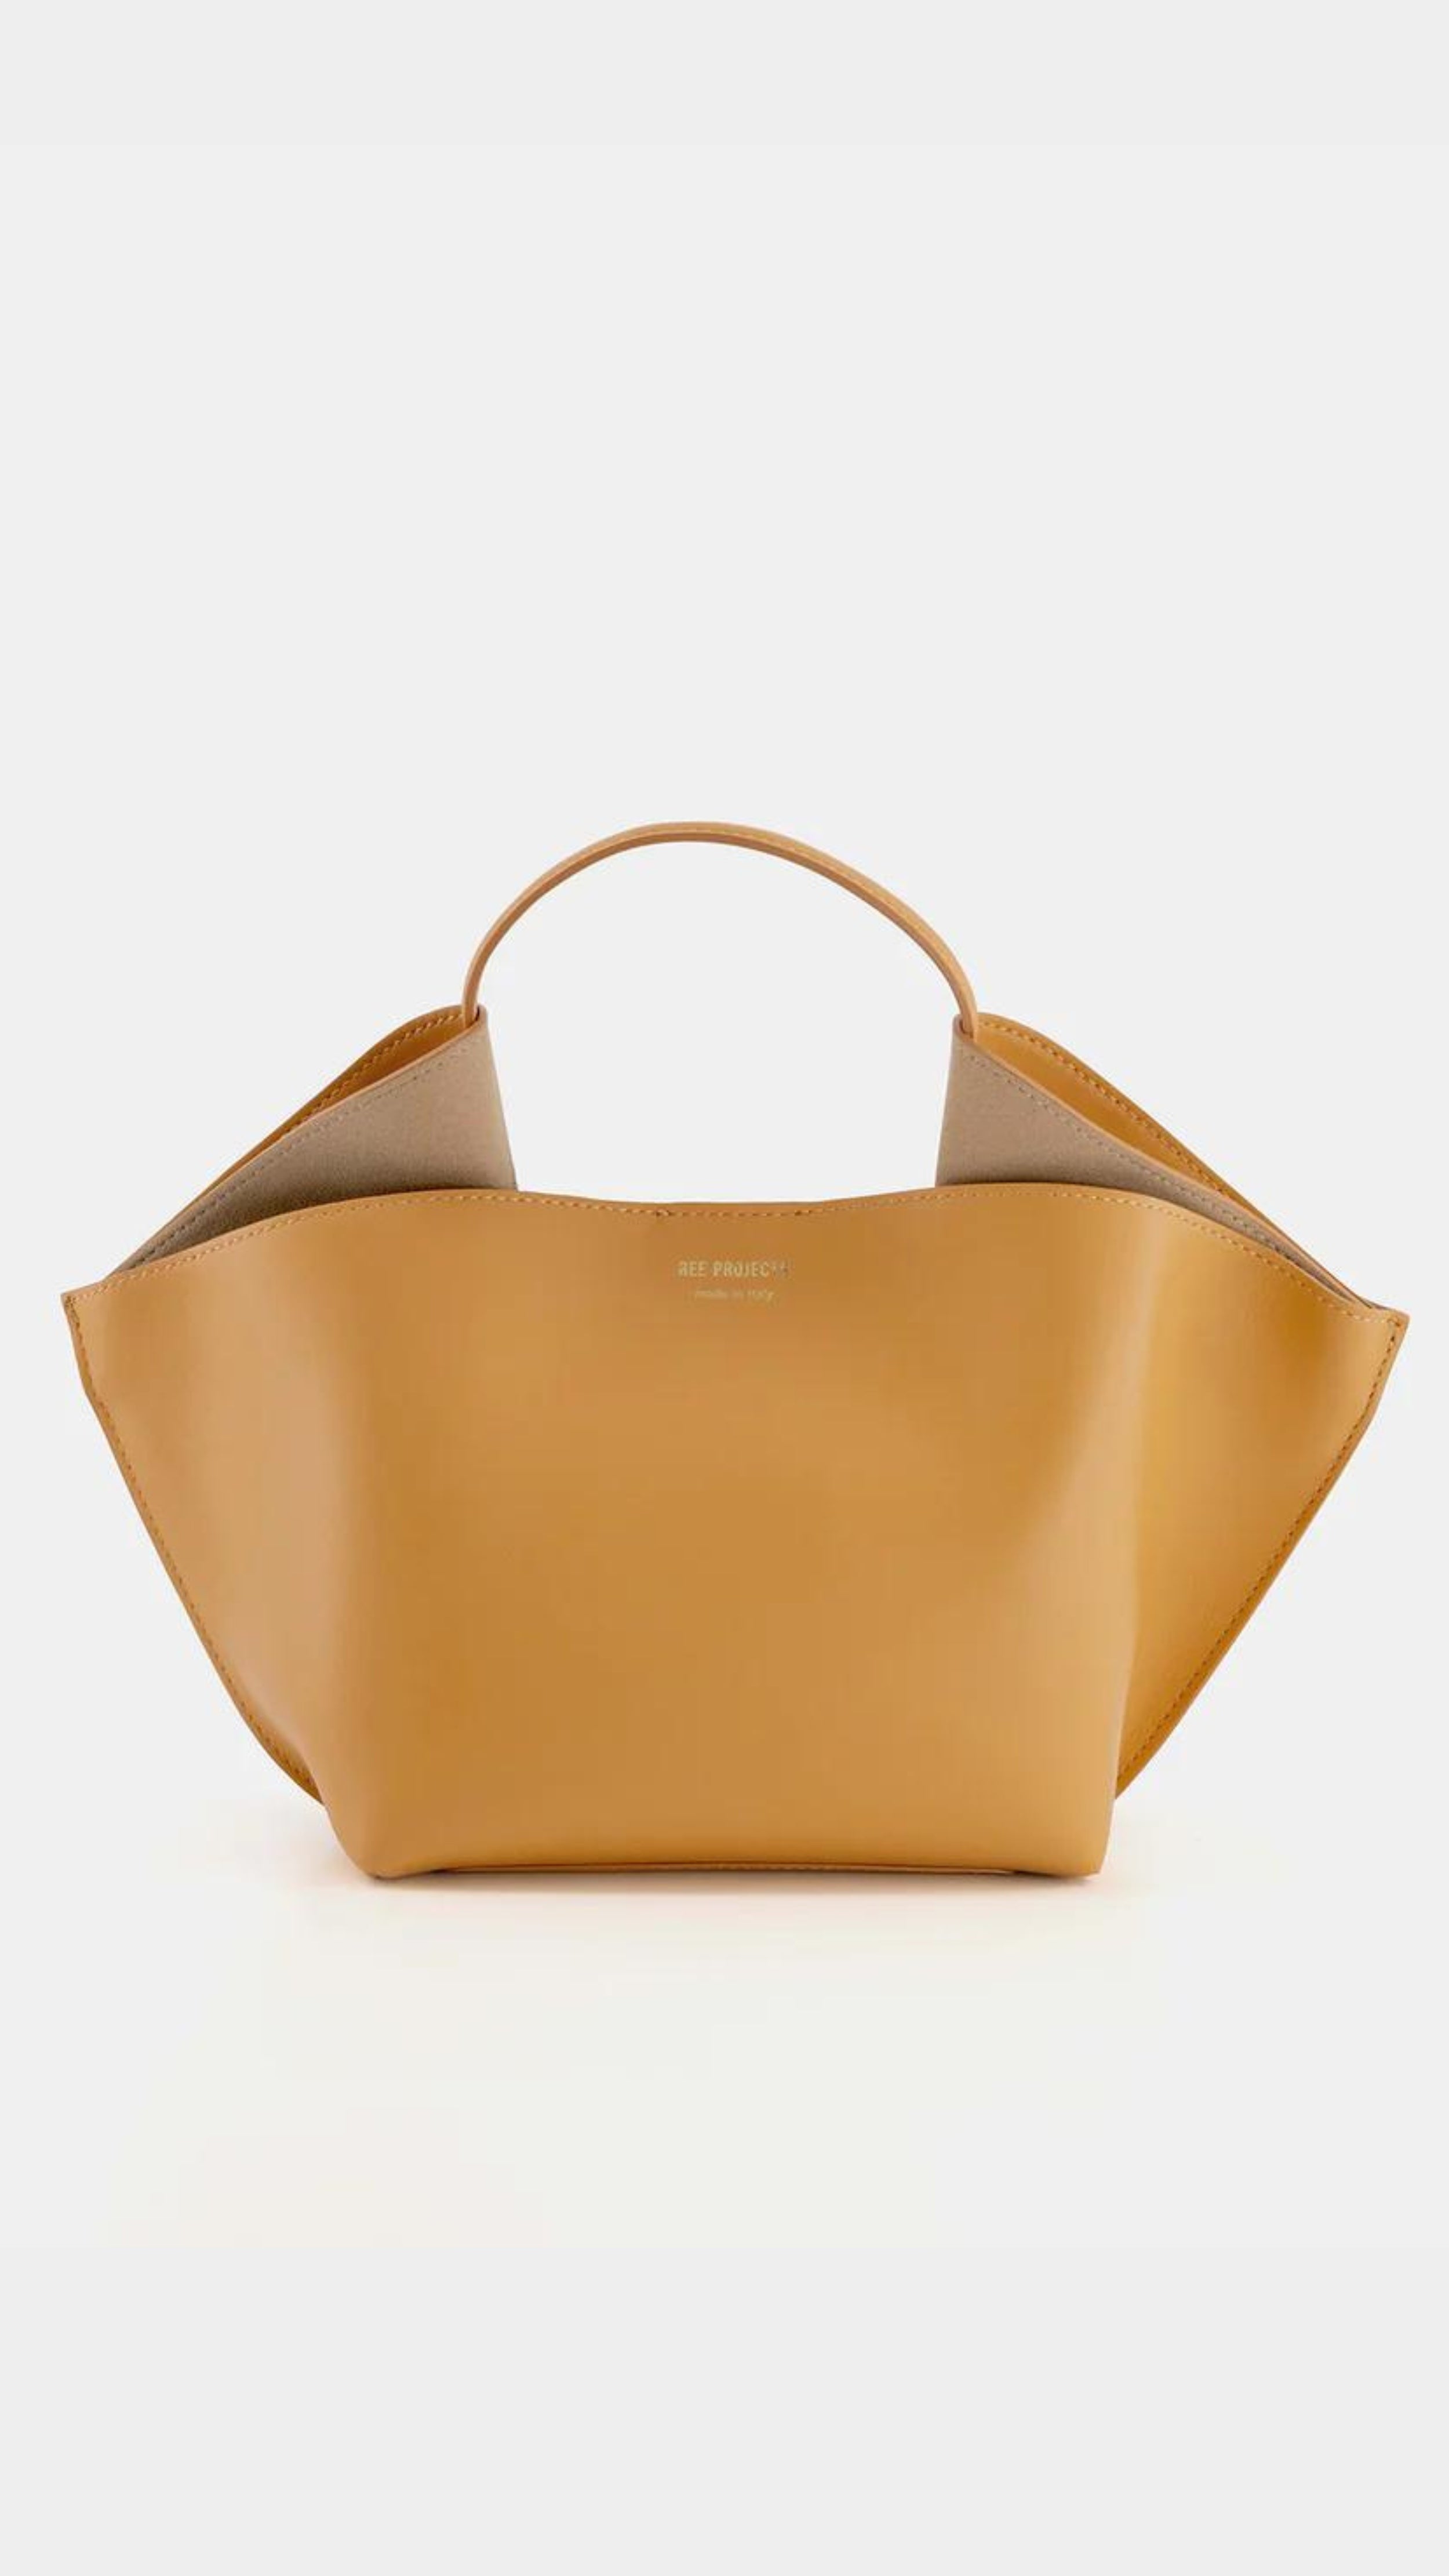 Ree Projects, Anne Tote Mini in Apricot.  An understated elegant every day bag. Crafted from the softest Italian calf leather, this apricot orange  purse features the signature folded 'Ree Projects top-line gussets' and a sculptural silhouette. Its mini-sized size easily fits your phone, tablet and other items. This purse can be used with the top handle or as a crossbody. It features interior pockets and a magnet snap closure.  Shown from the front view.